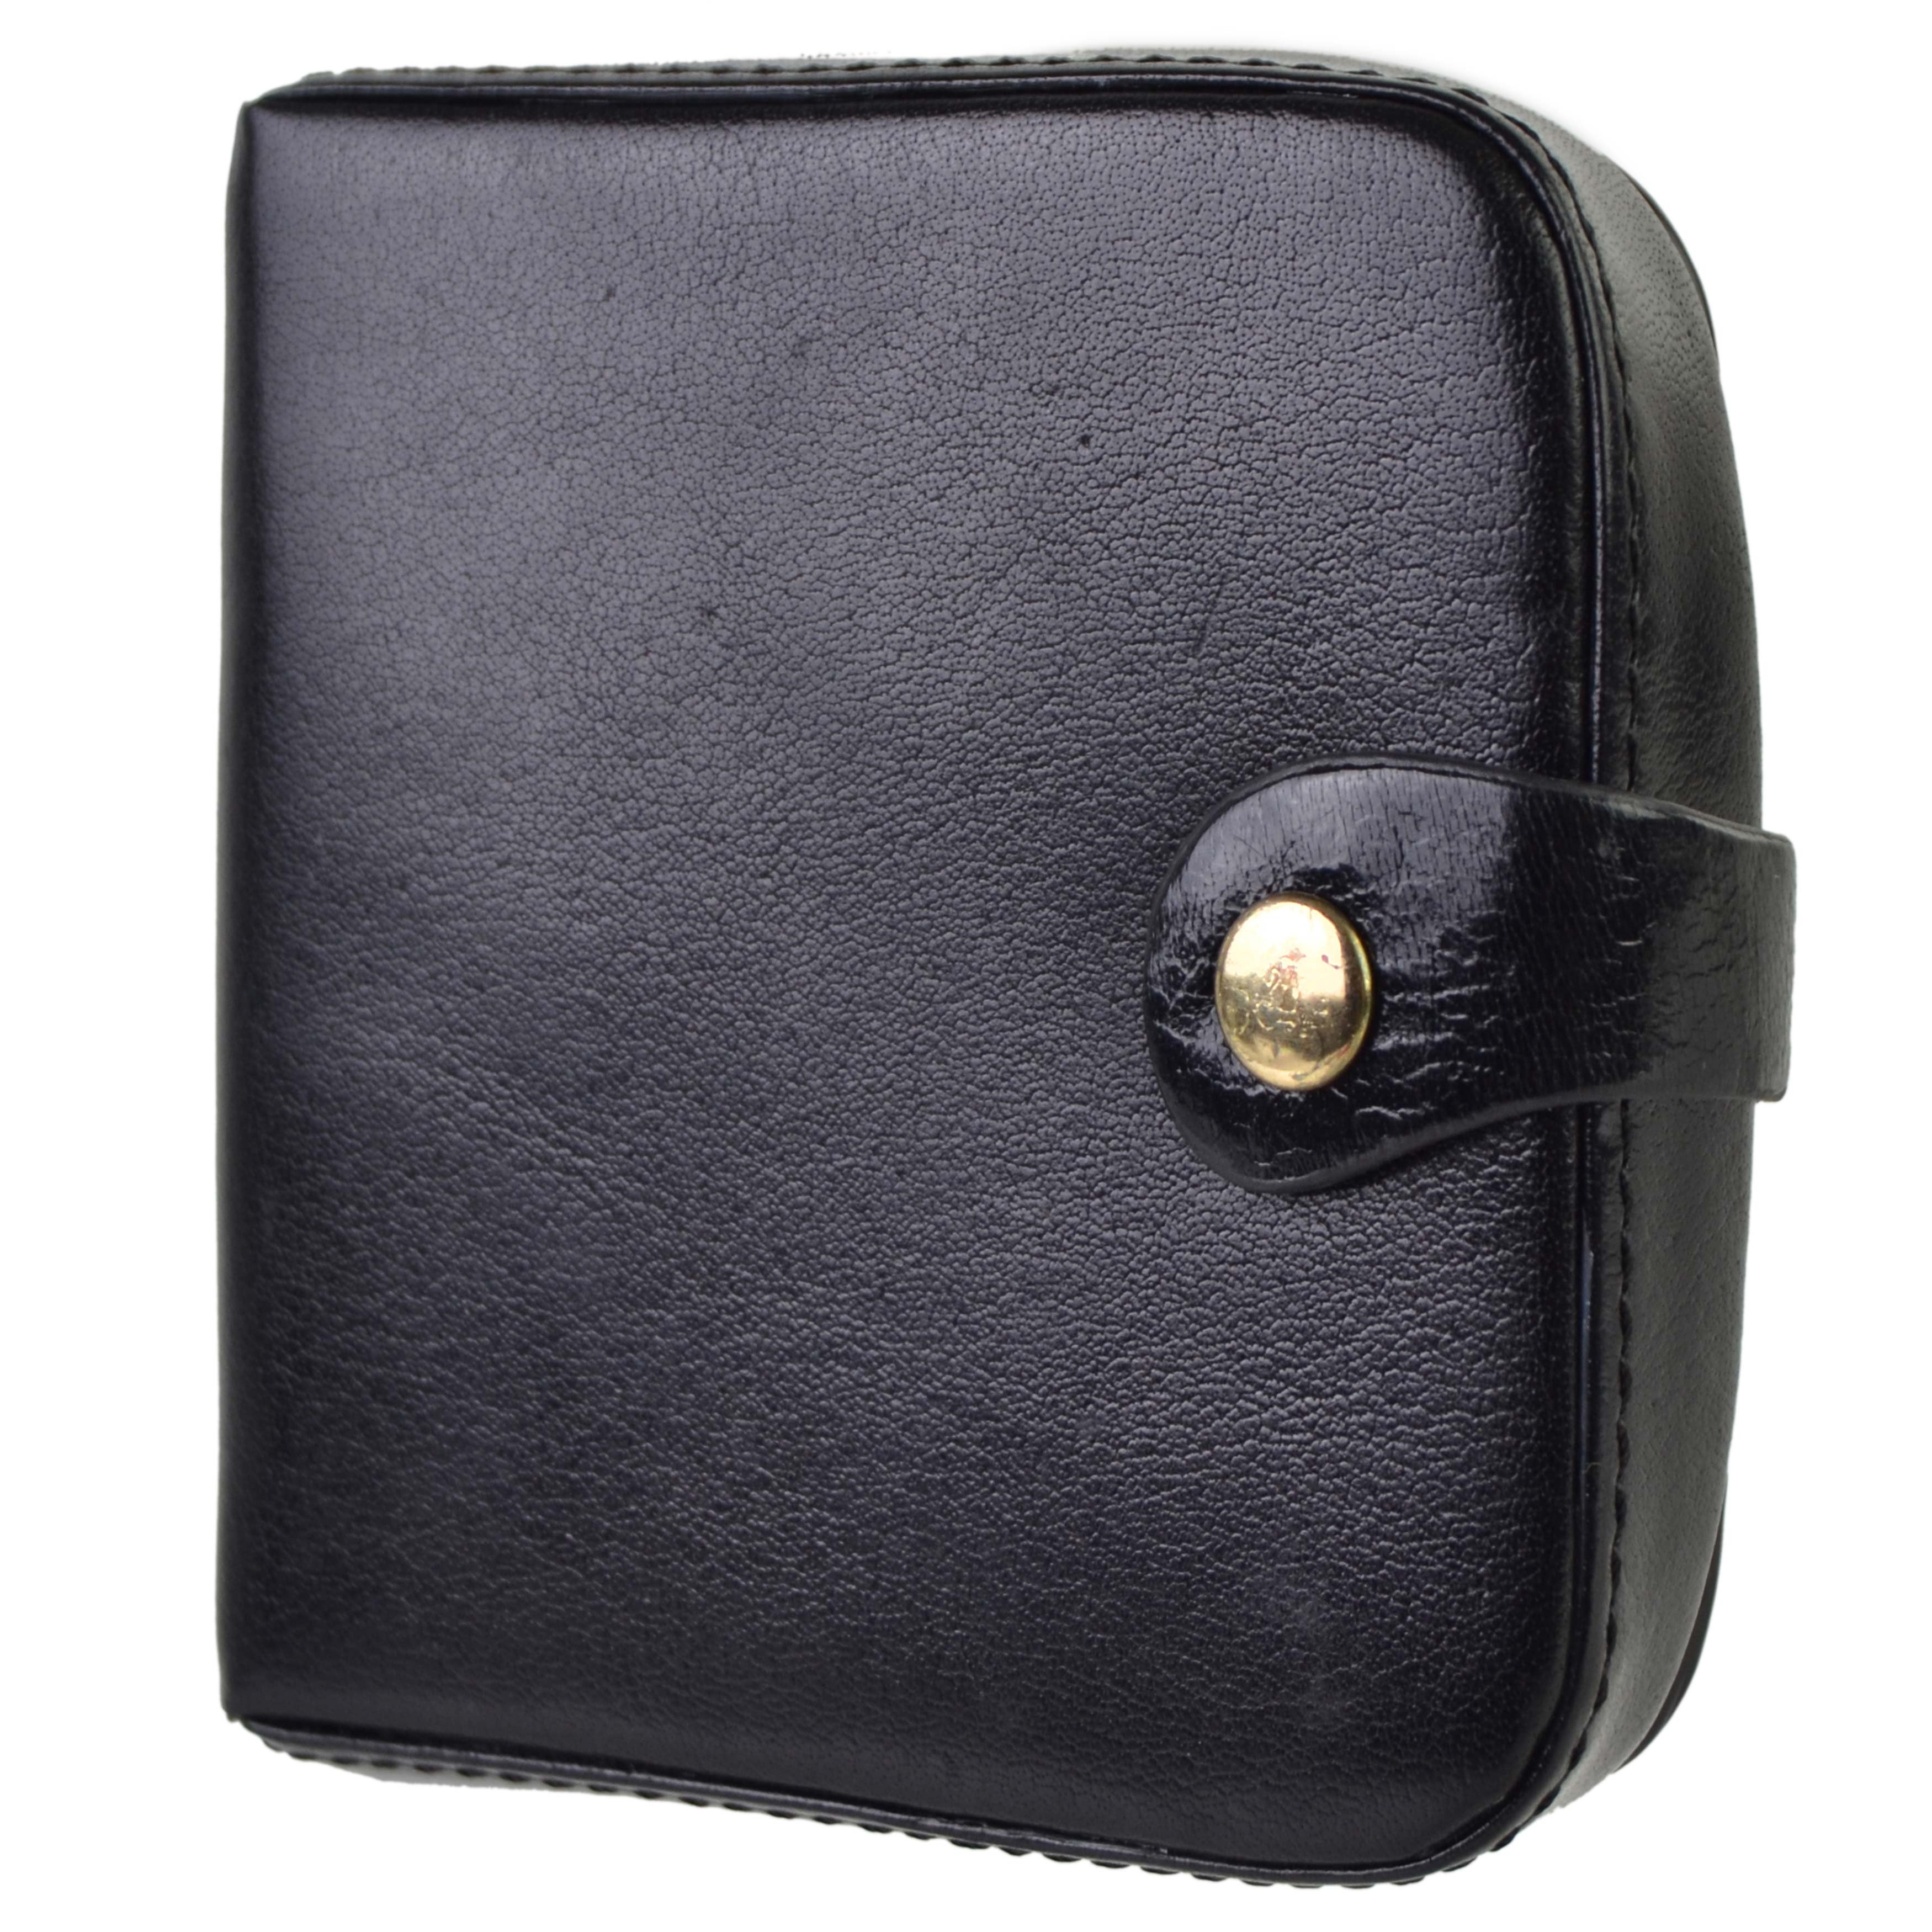 Mens Quality Leather Coin Tray Purse Wallet  Black 